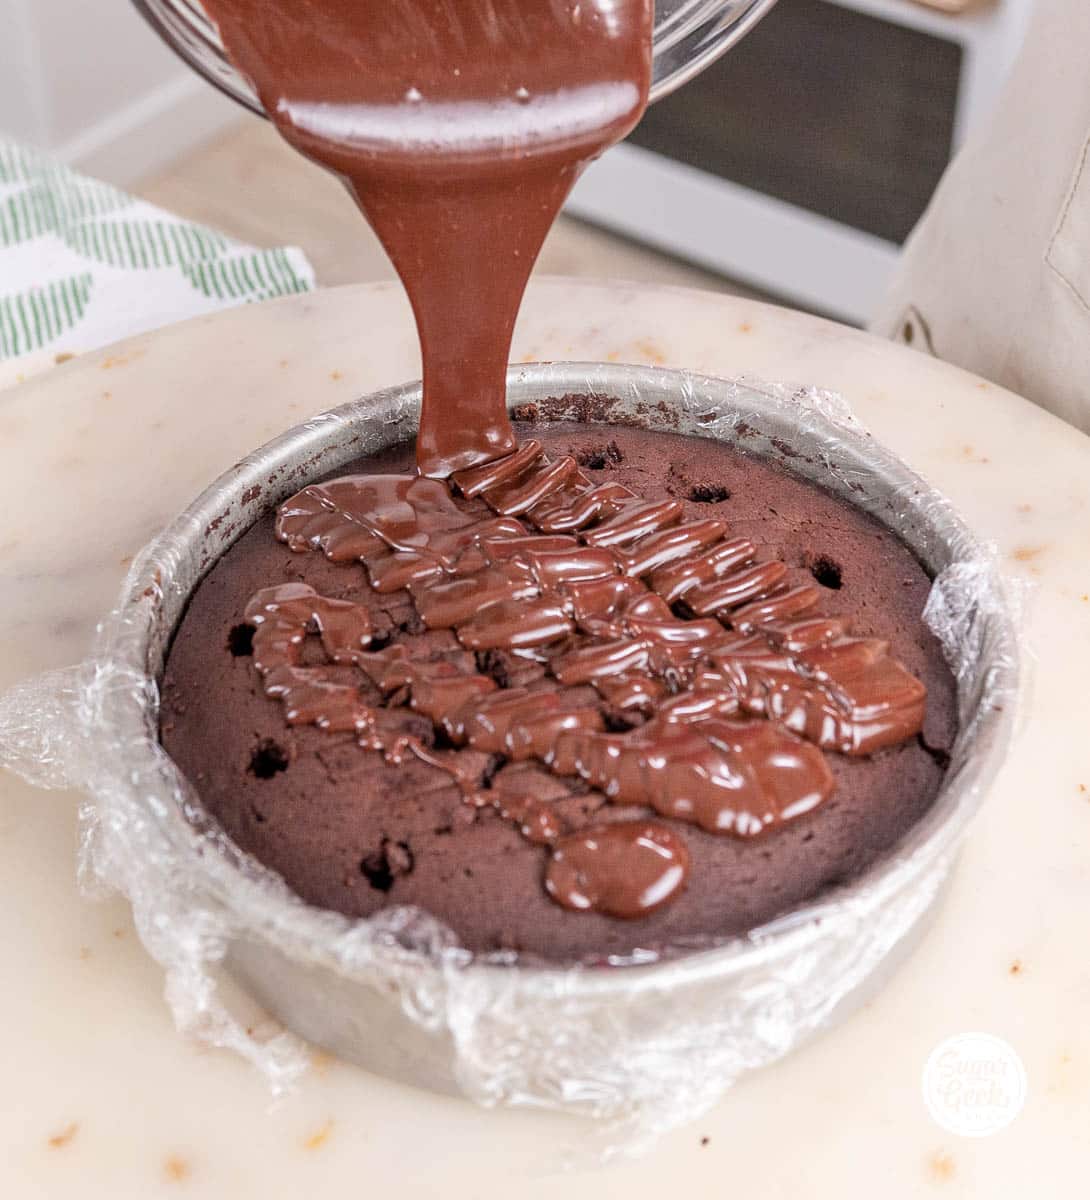 drizzling chocolate sauce into the holes of a chocolate cake